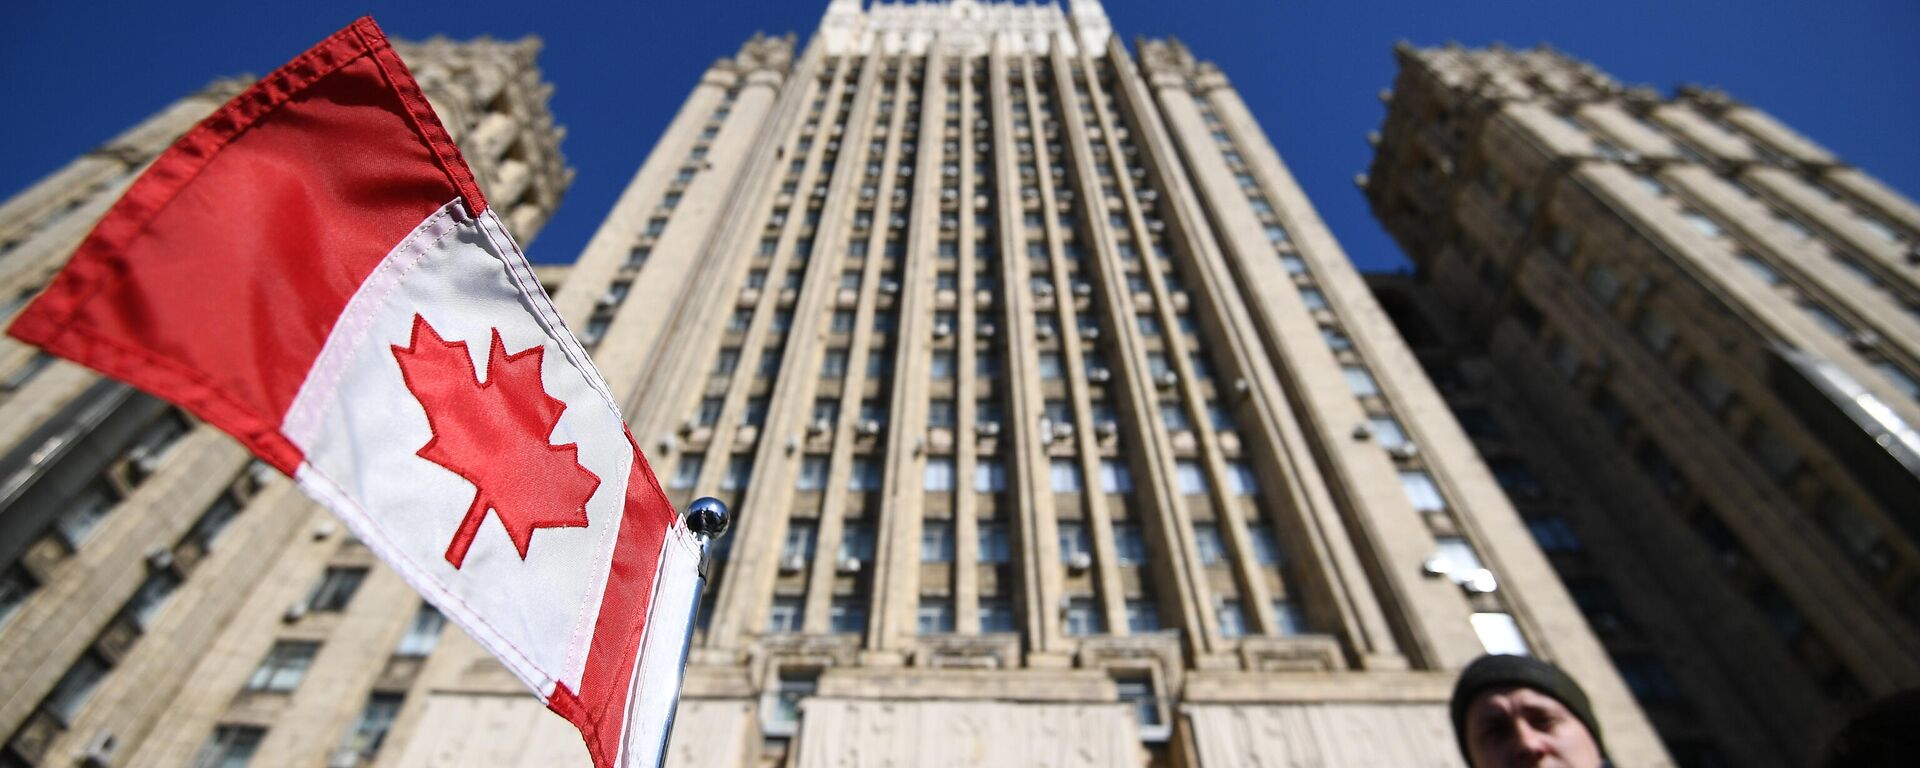 The flag of Canada on the car of the embassy in front of the building of the Russian Ministry of Foreign Affairs - Sputnik International, 1920, 02.08.2022